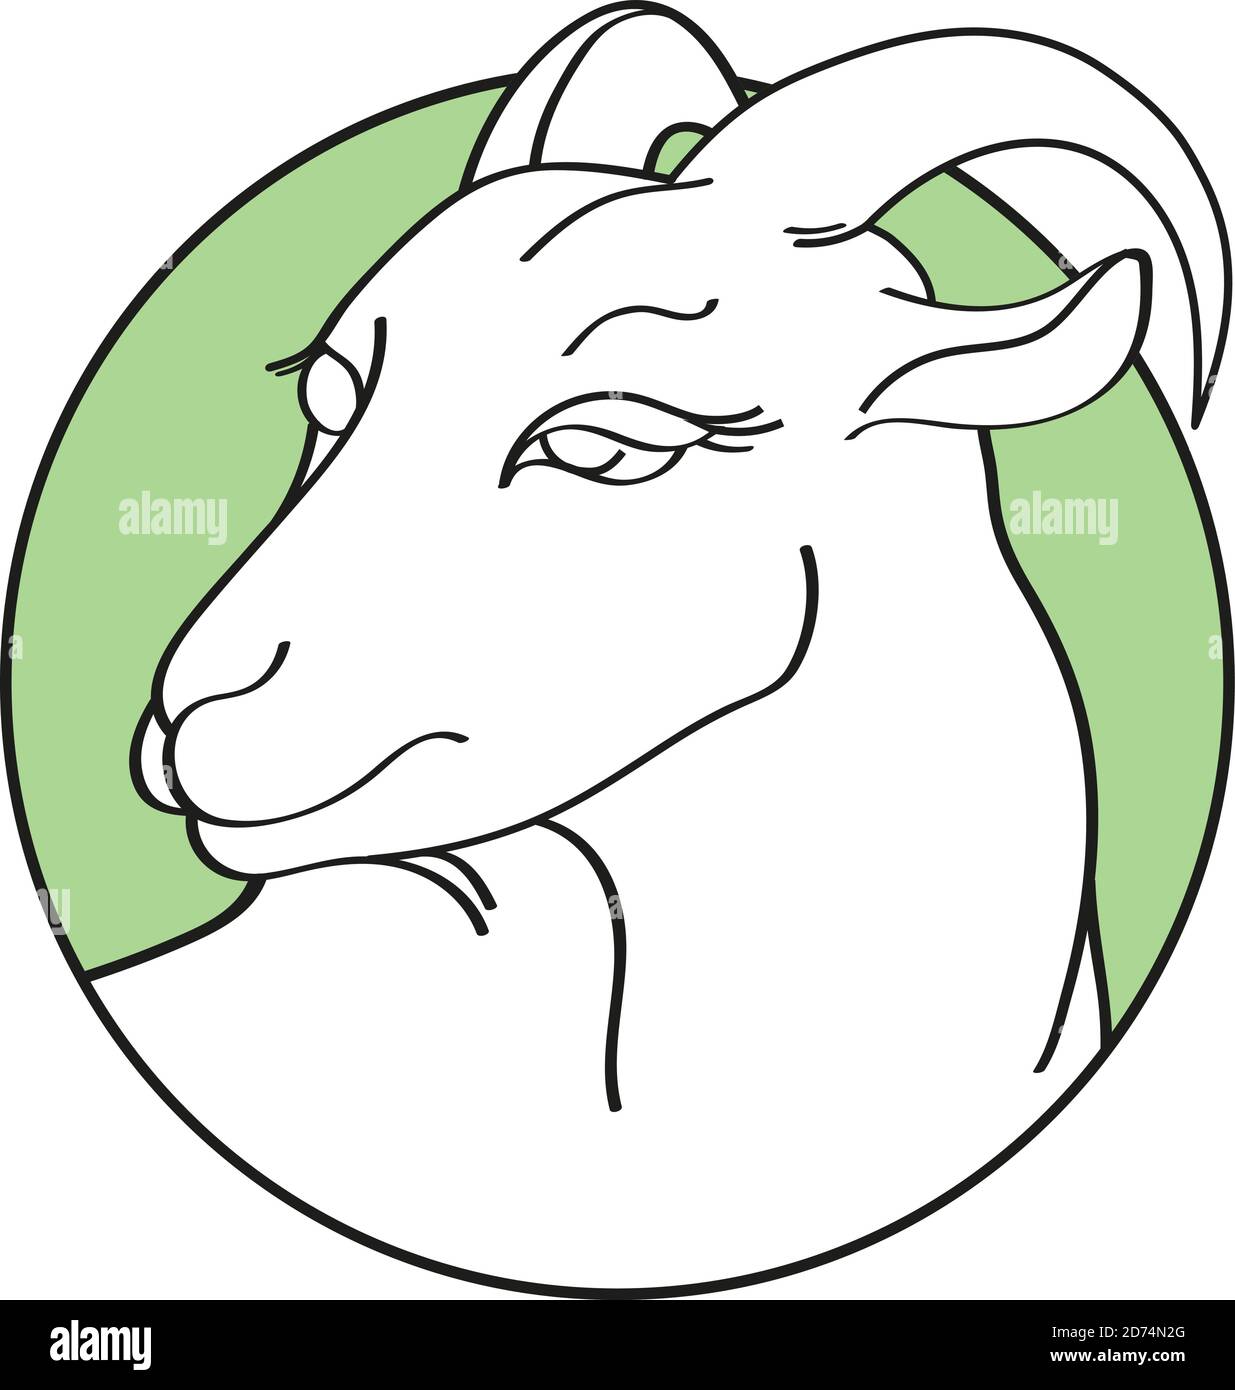 Handdrawn goat in round green frame isolated on a white background. Linear silhouette. Vector illustration. Emblem organic farmer cheese, milk or meat Stock Vector